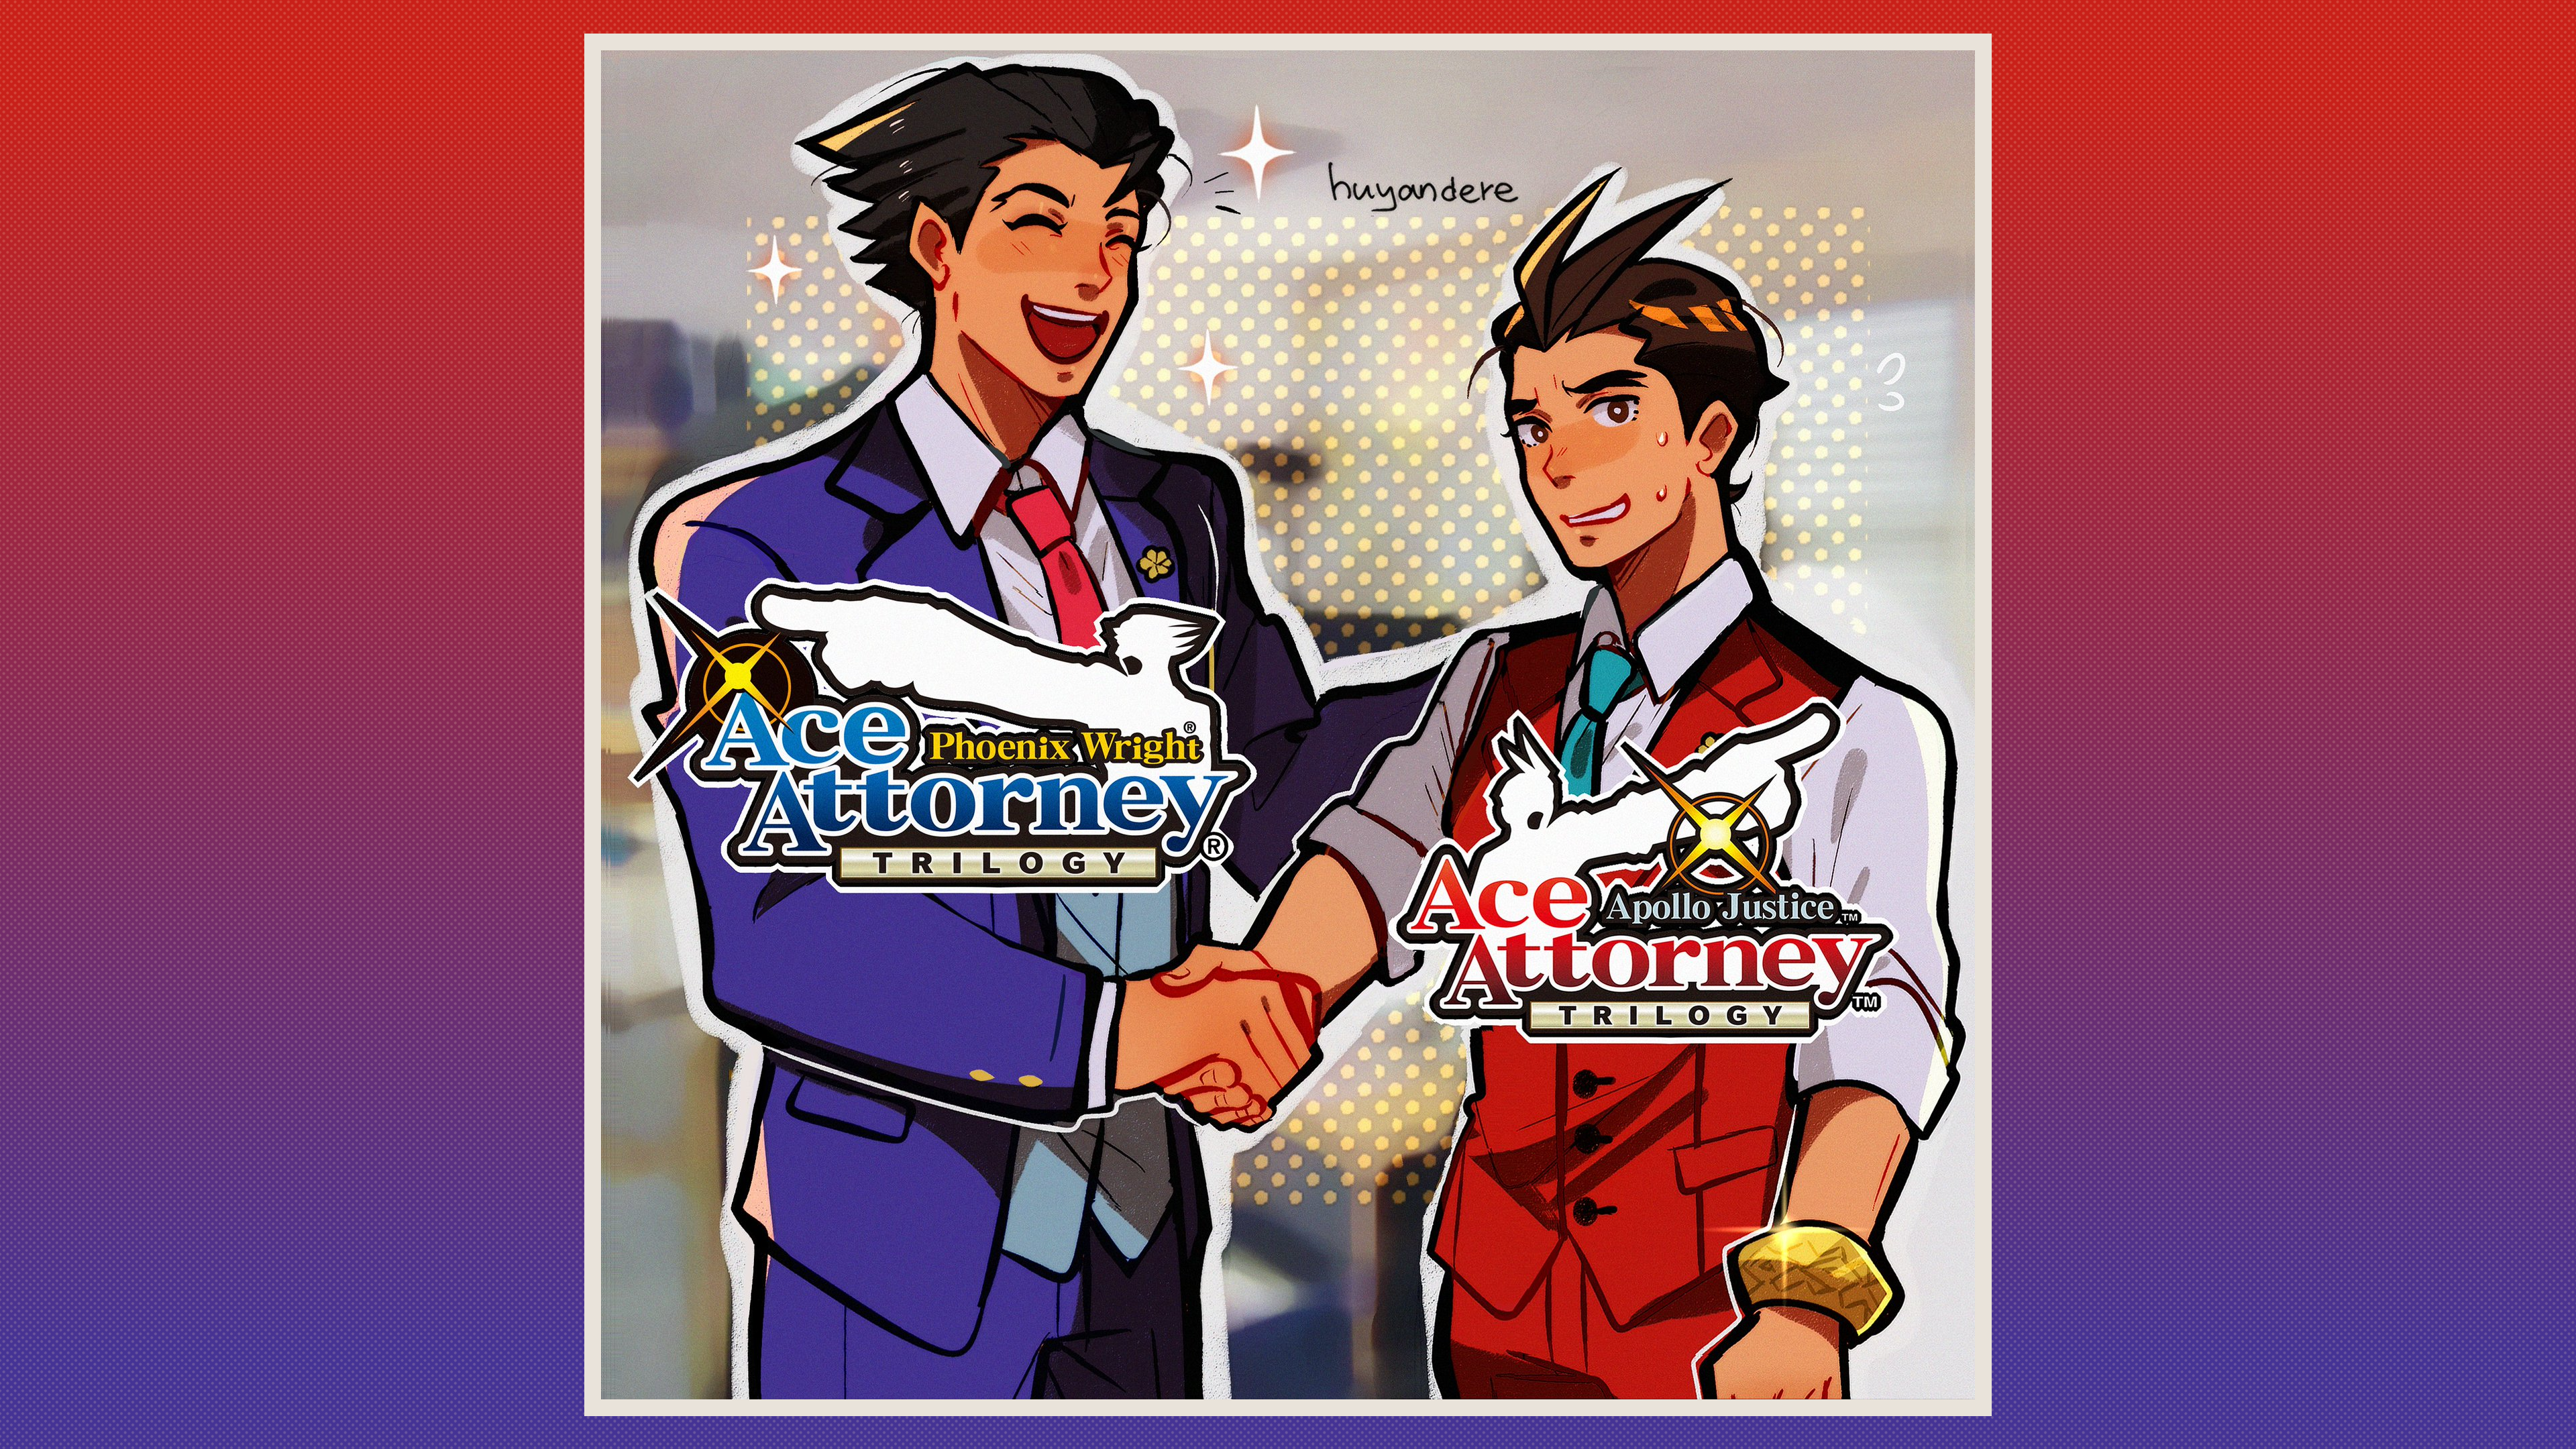 Video Games Spiky Hair Ace Attorney Phoenix Wright Apollo Justice Trilogy Capcom Suits Red Tie Blue  3840x2160